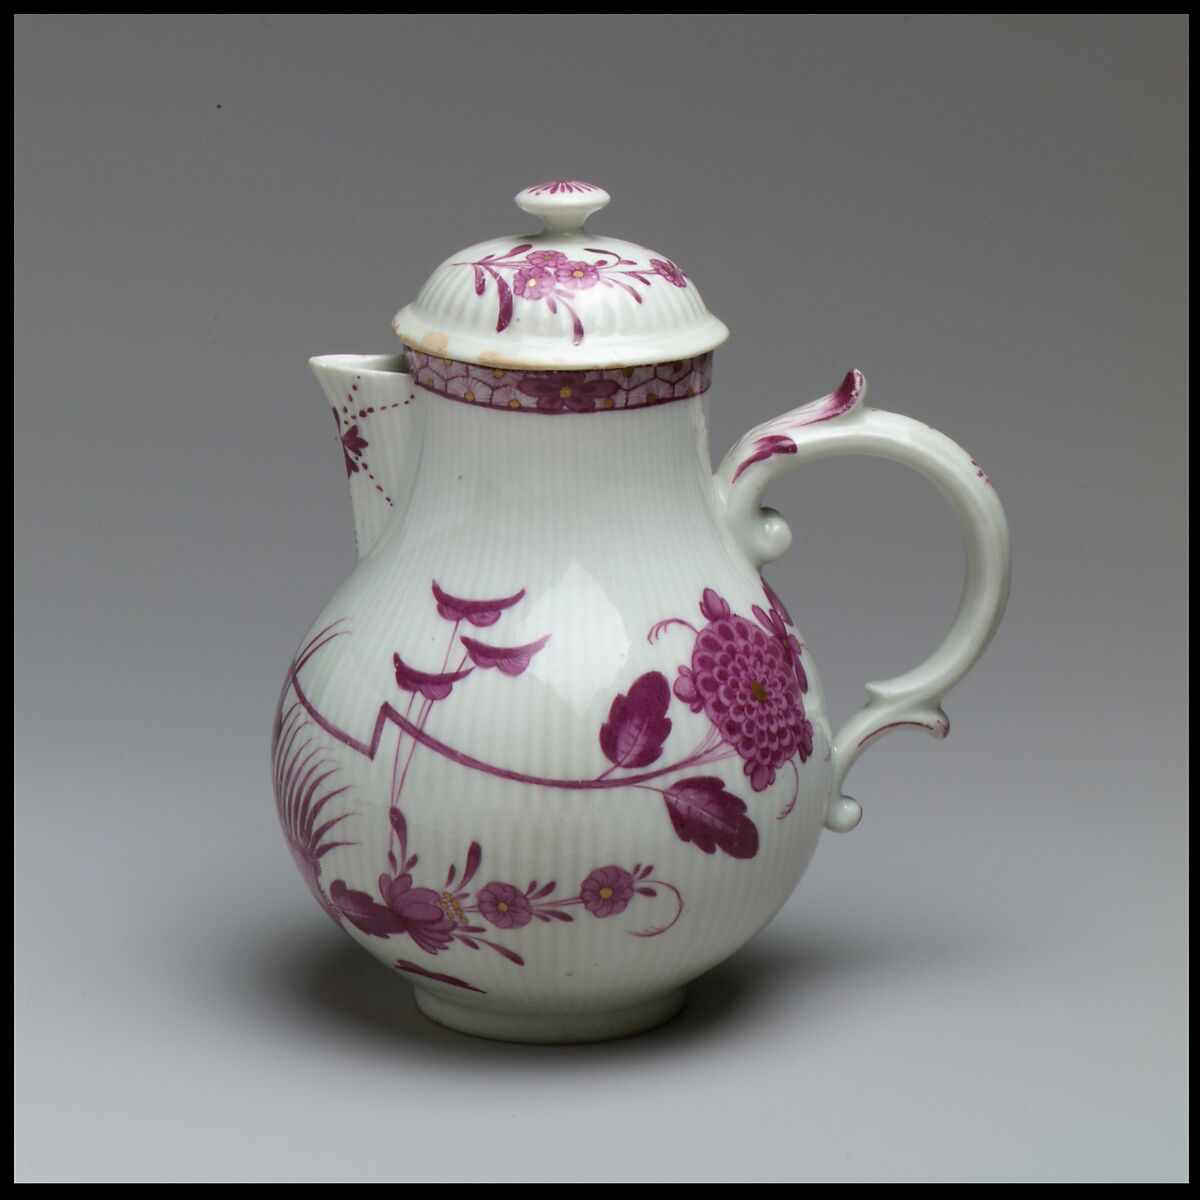 Milk jug with cover, Zurich Pottery and Porcelain Factory (Swiss, founded 1763), Hard-paste porcelain, Swiss, Zurich 